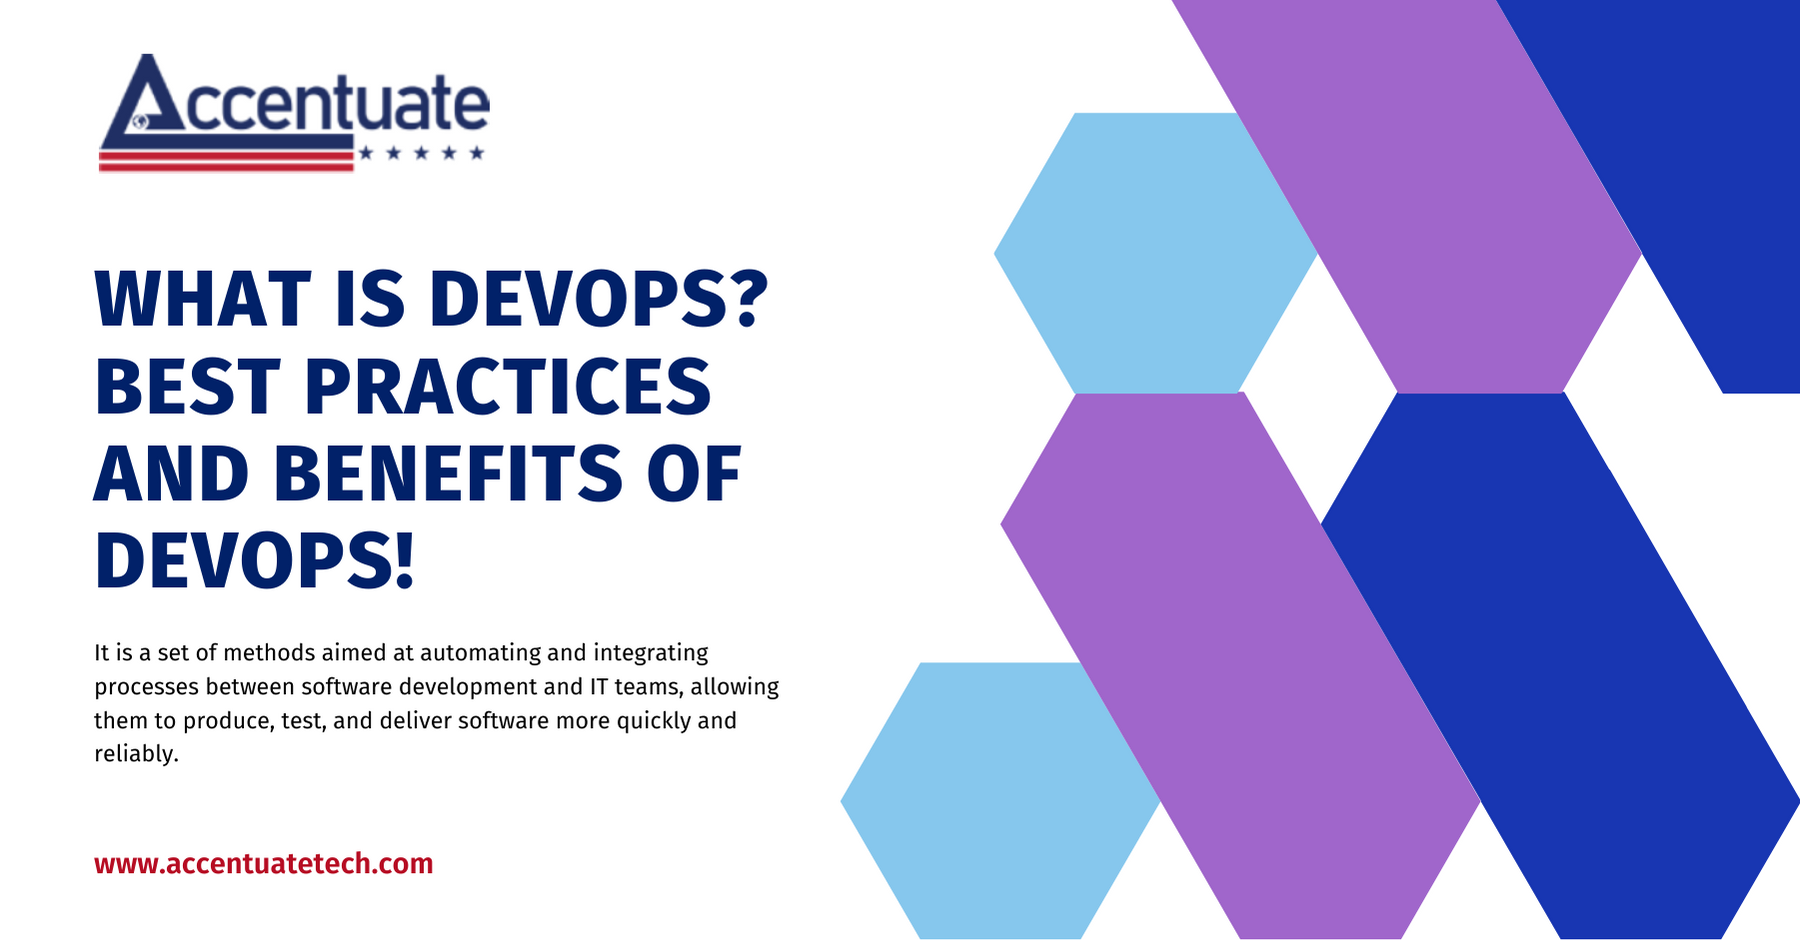 What is Devops? Benefits and Best practices